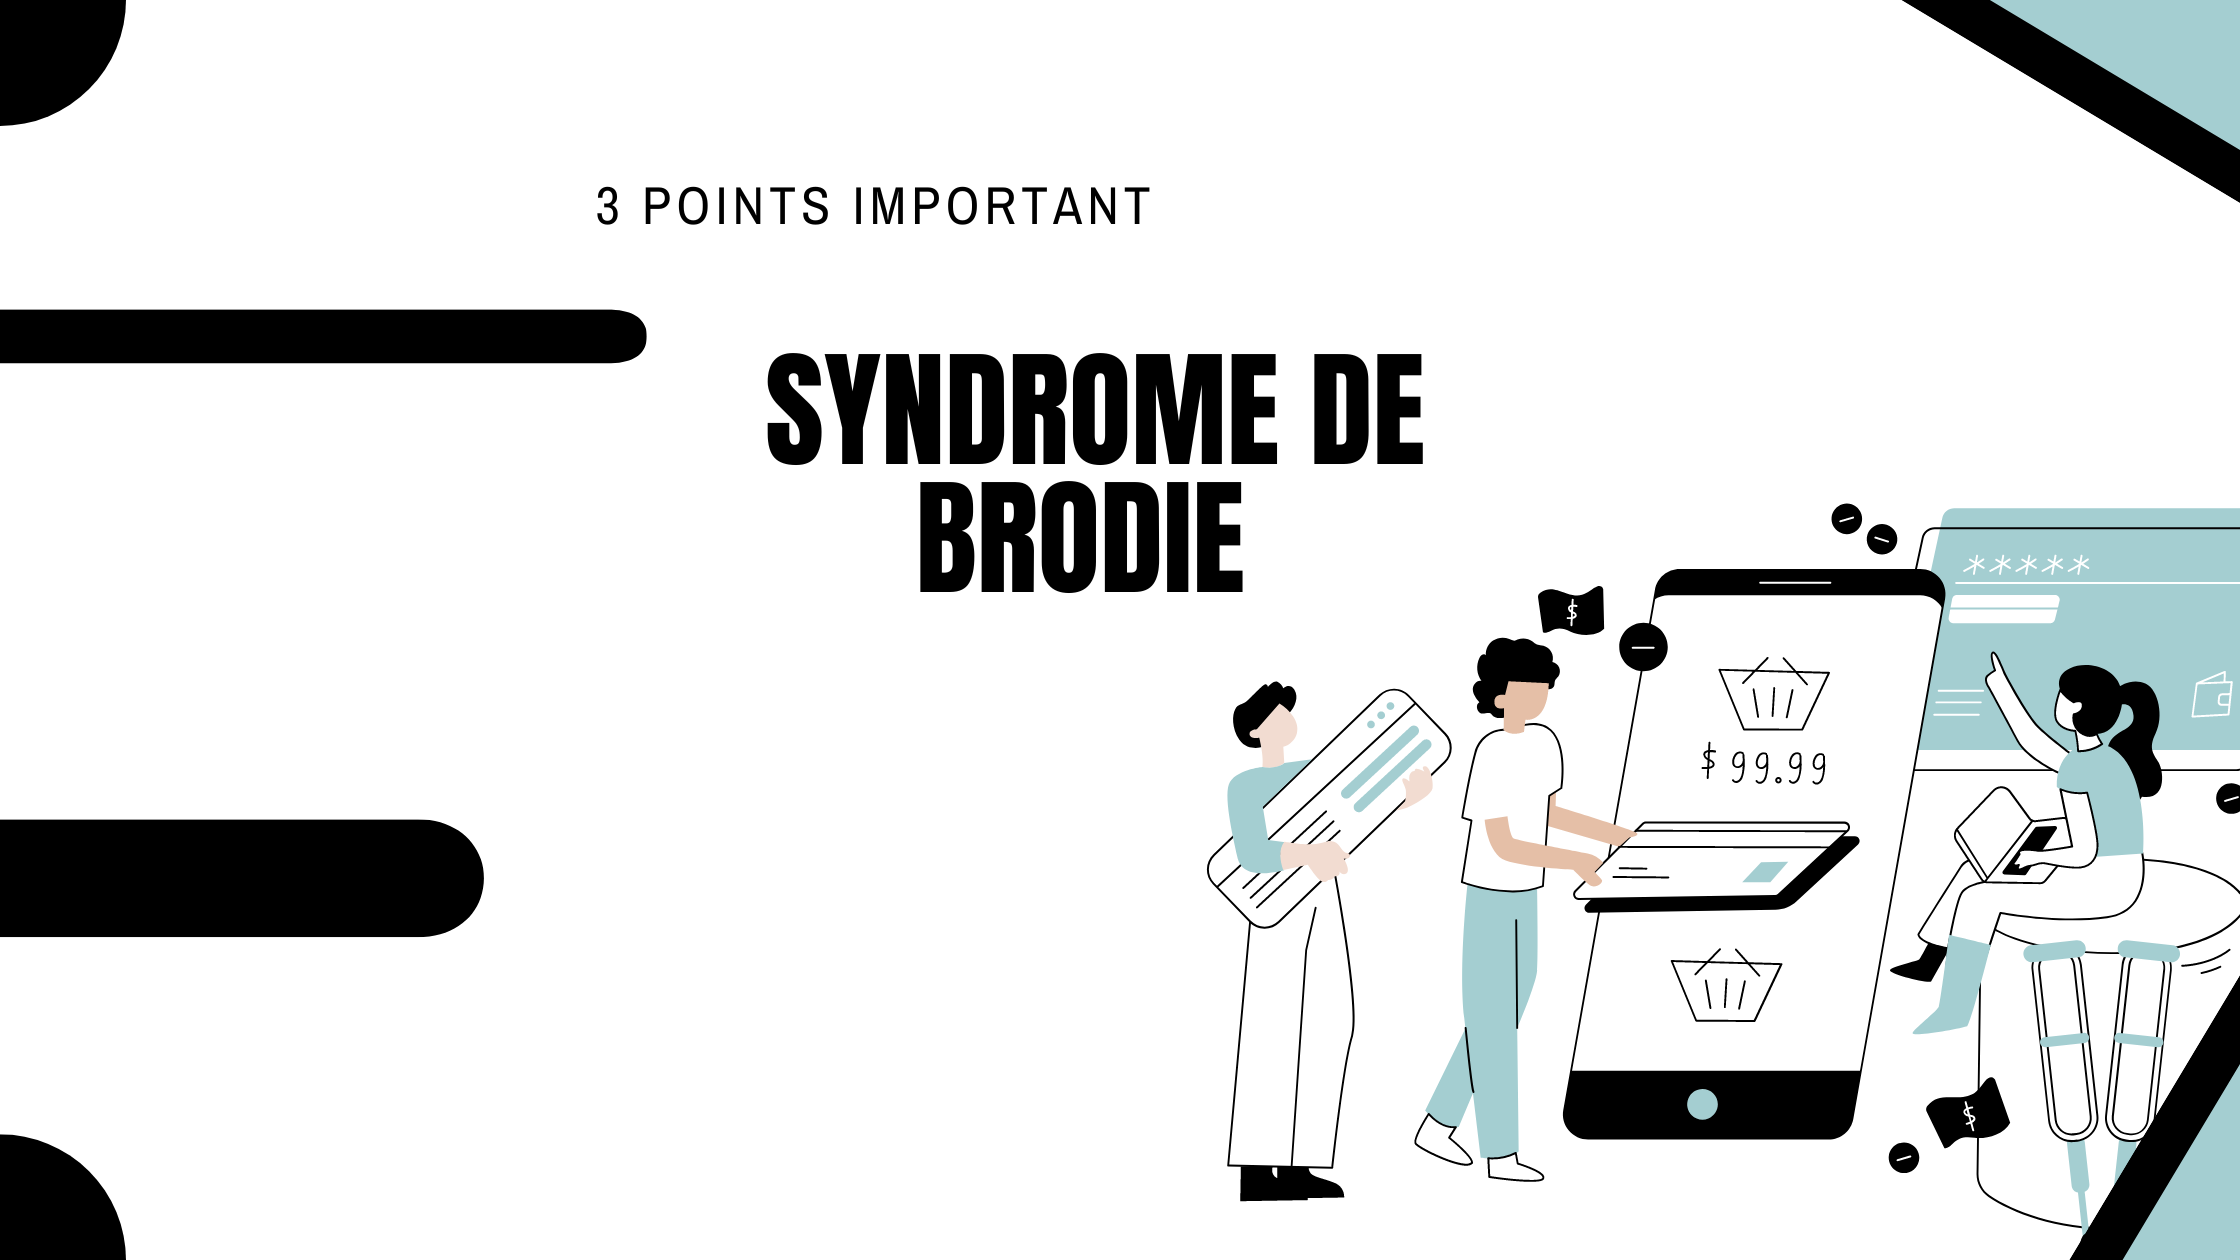 Syndrome de Brodie | 3 Points Important